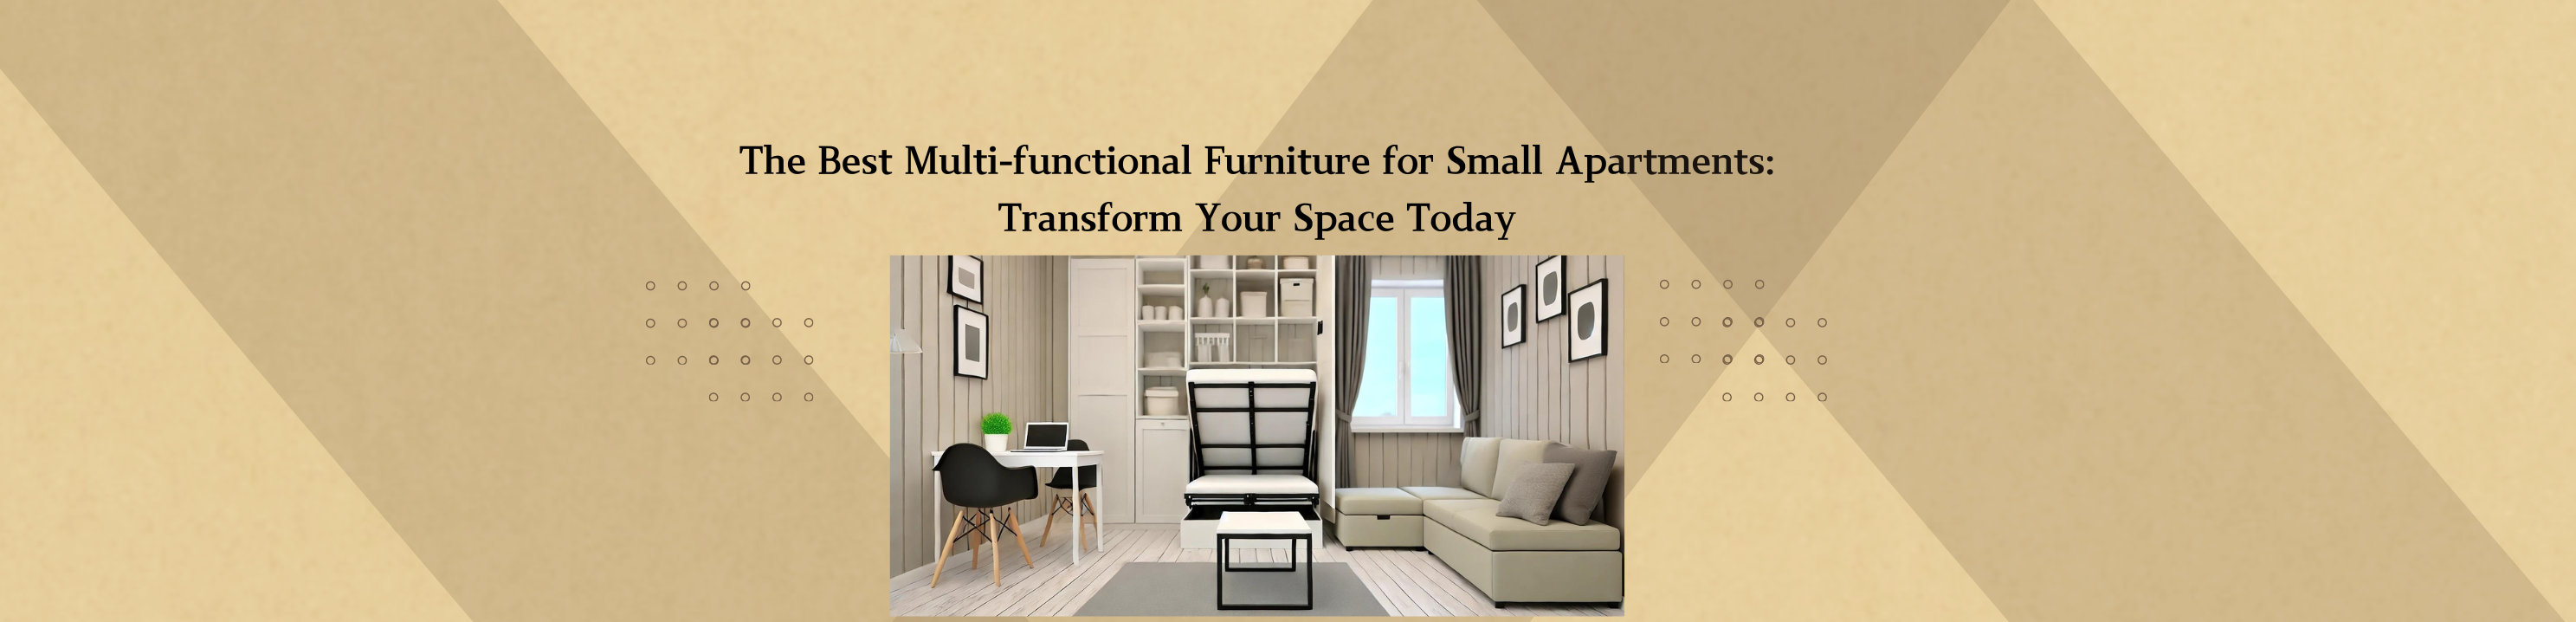 Top 10 Best Multi-functional Furniture for Small Apartments